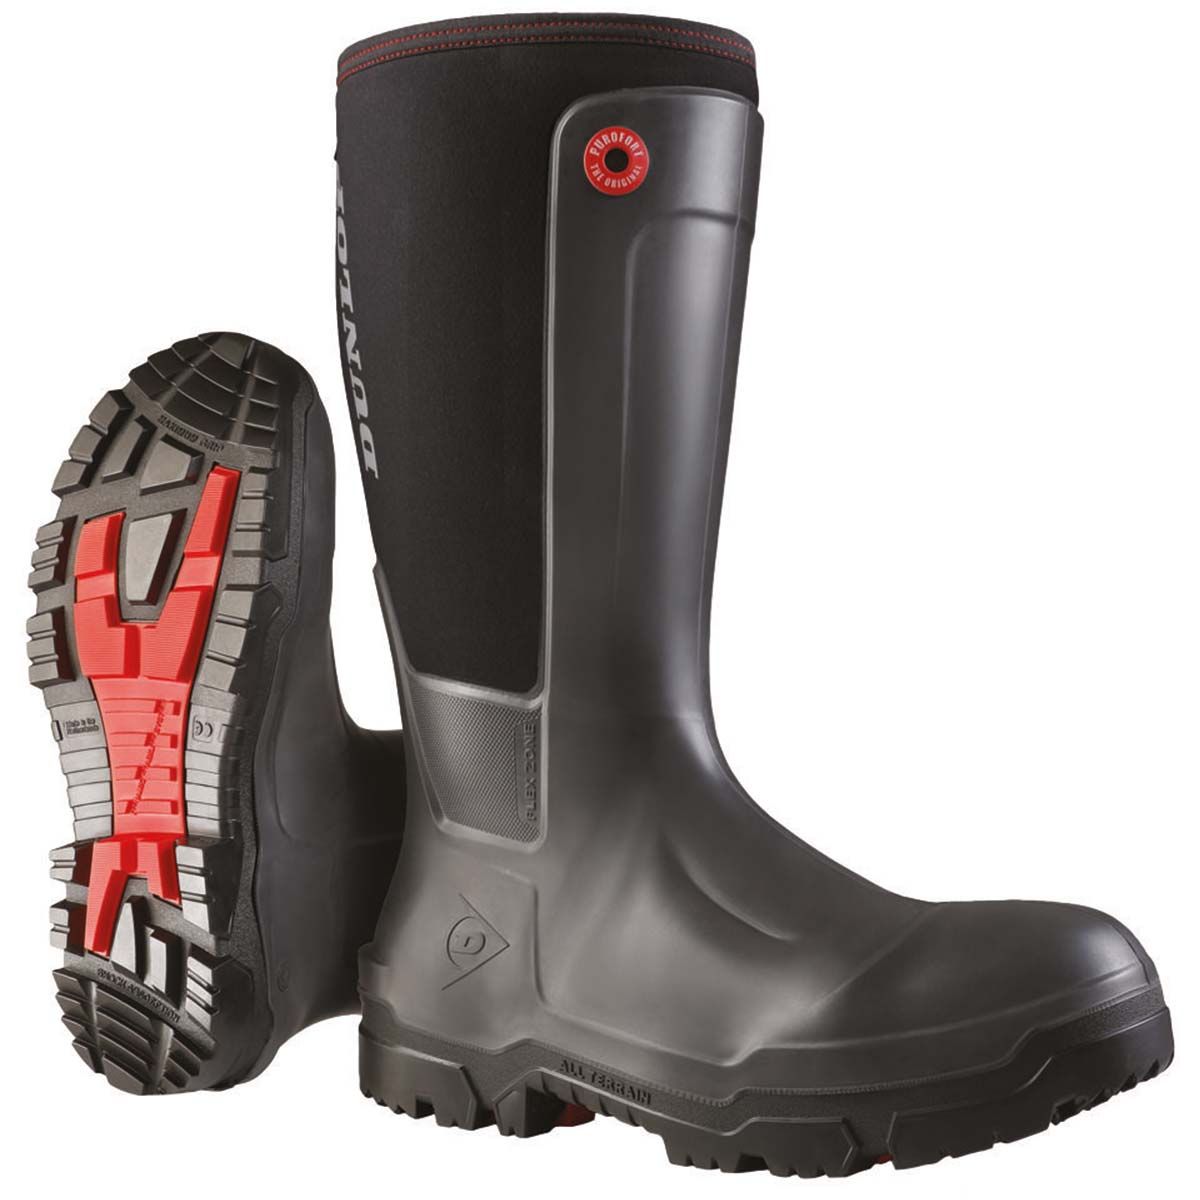 Dunlop Snugboot WorkPro Full Safety gumicsizma 38